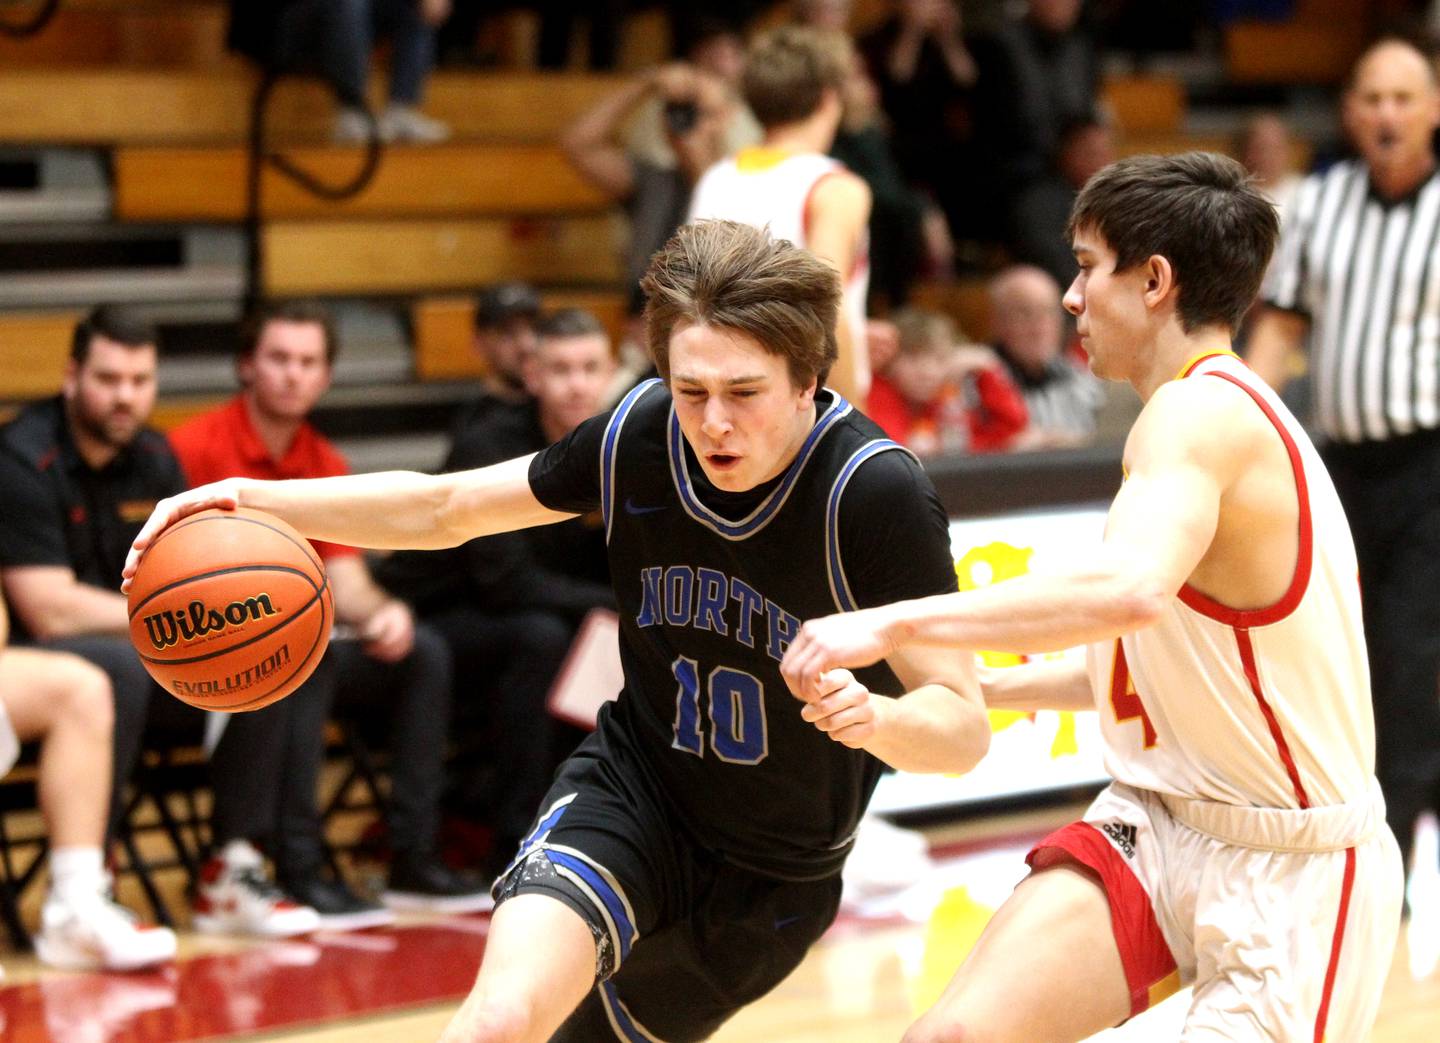 St. Charles North’s Danny Connolly (left) drives toward the basket during a game at Batavia on Wednesday, Jan. 11, 2023.